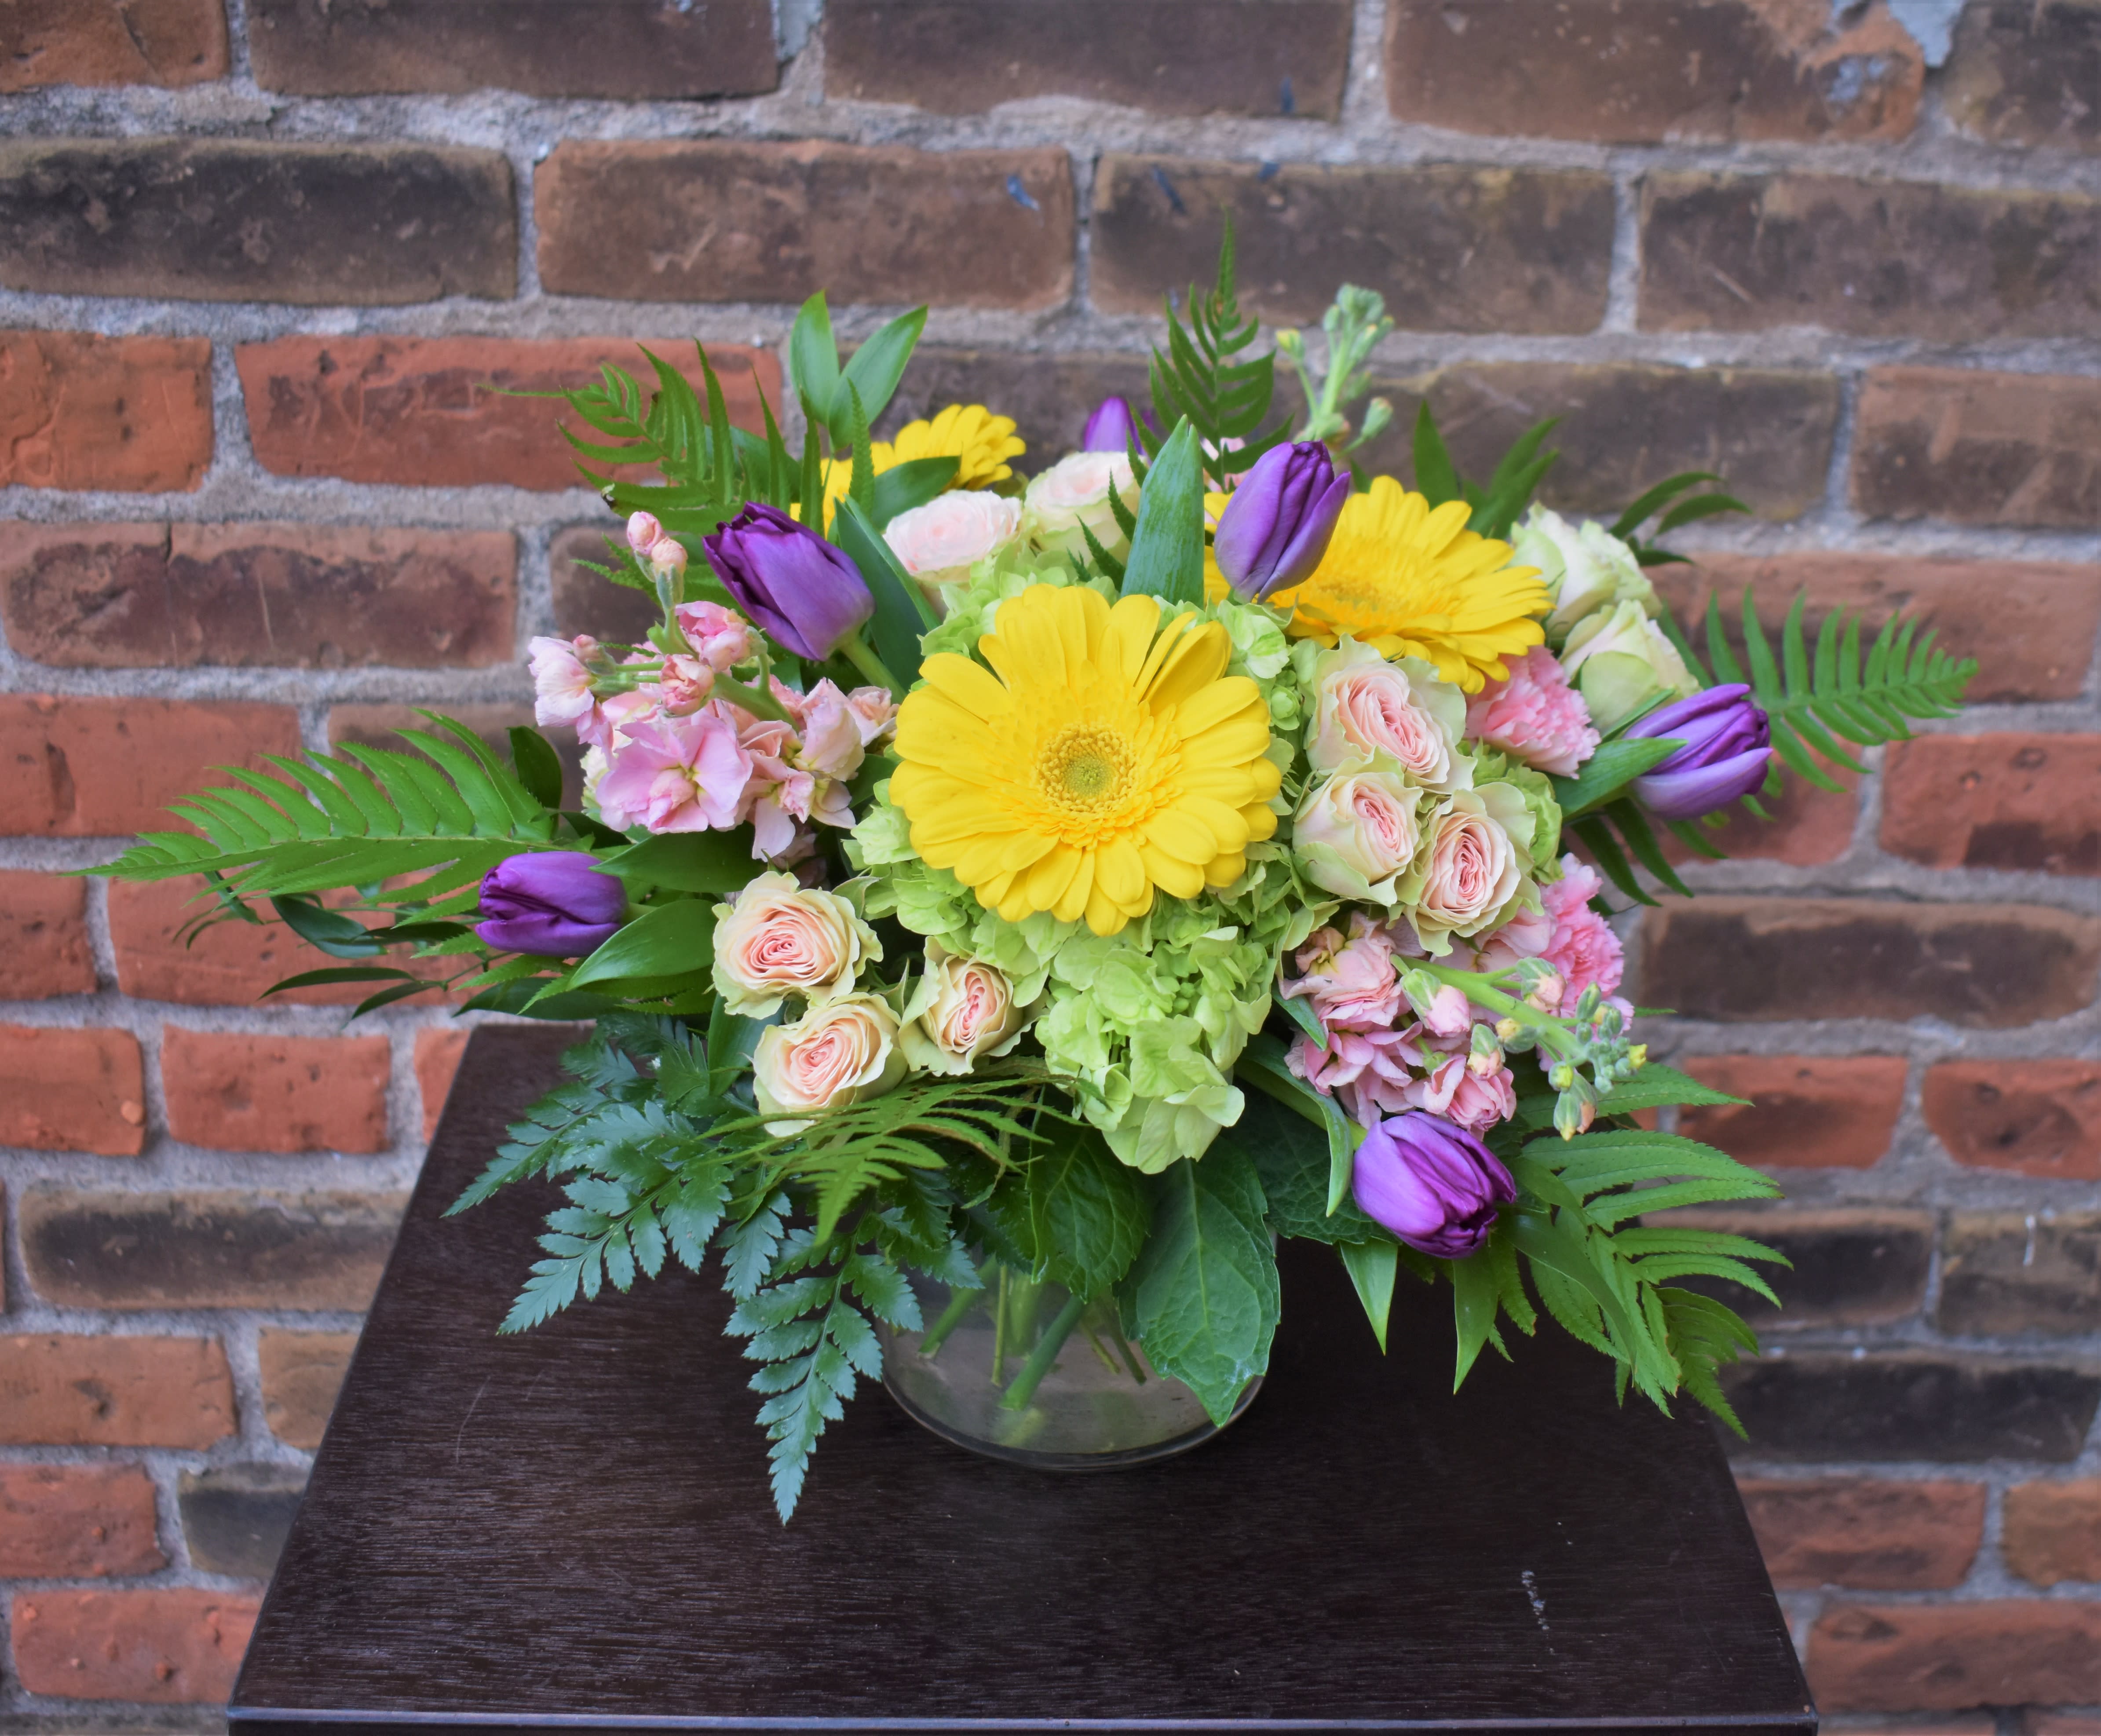 Pastel Elegance - Spring-time blooms of tulips, gerber daisies, hydrangea, spray roses, stock, and spring greens are arranged in a clear vase and make an elegant design bursting with hopeful colors...perfect for celebrating the season!  Design size is Approx. 12&quot;X12&quot;